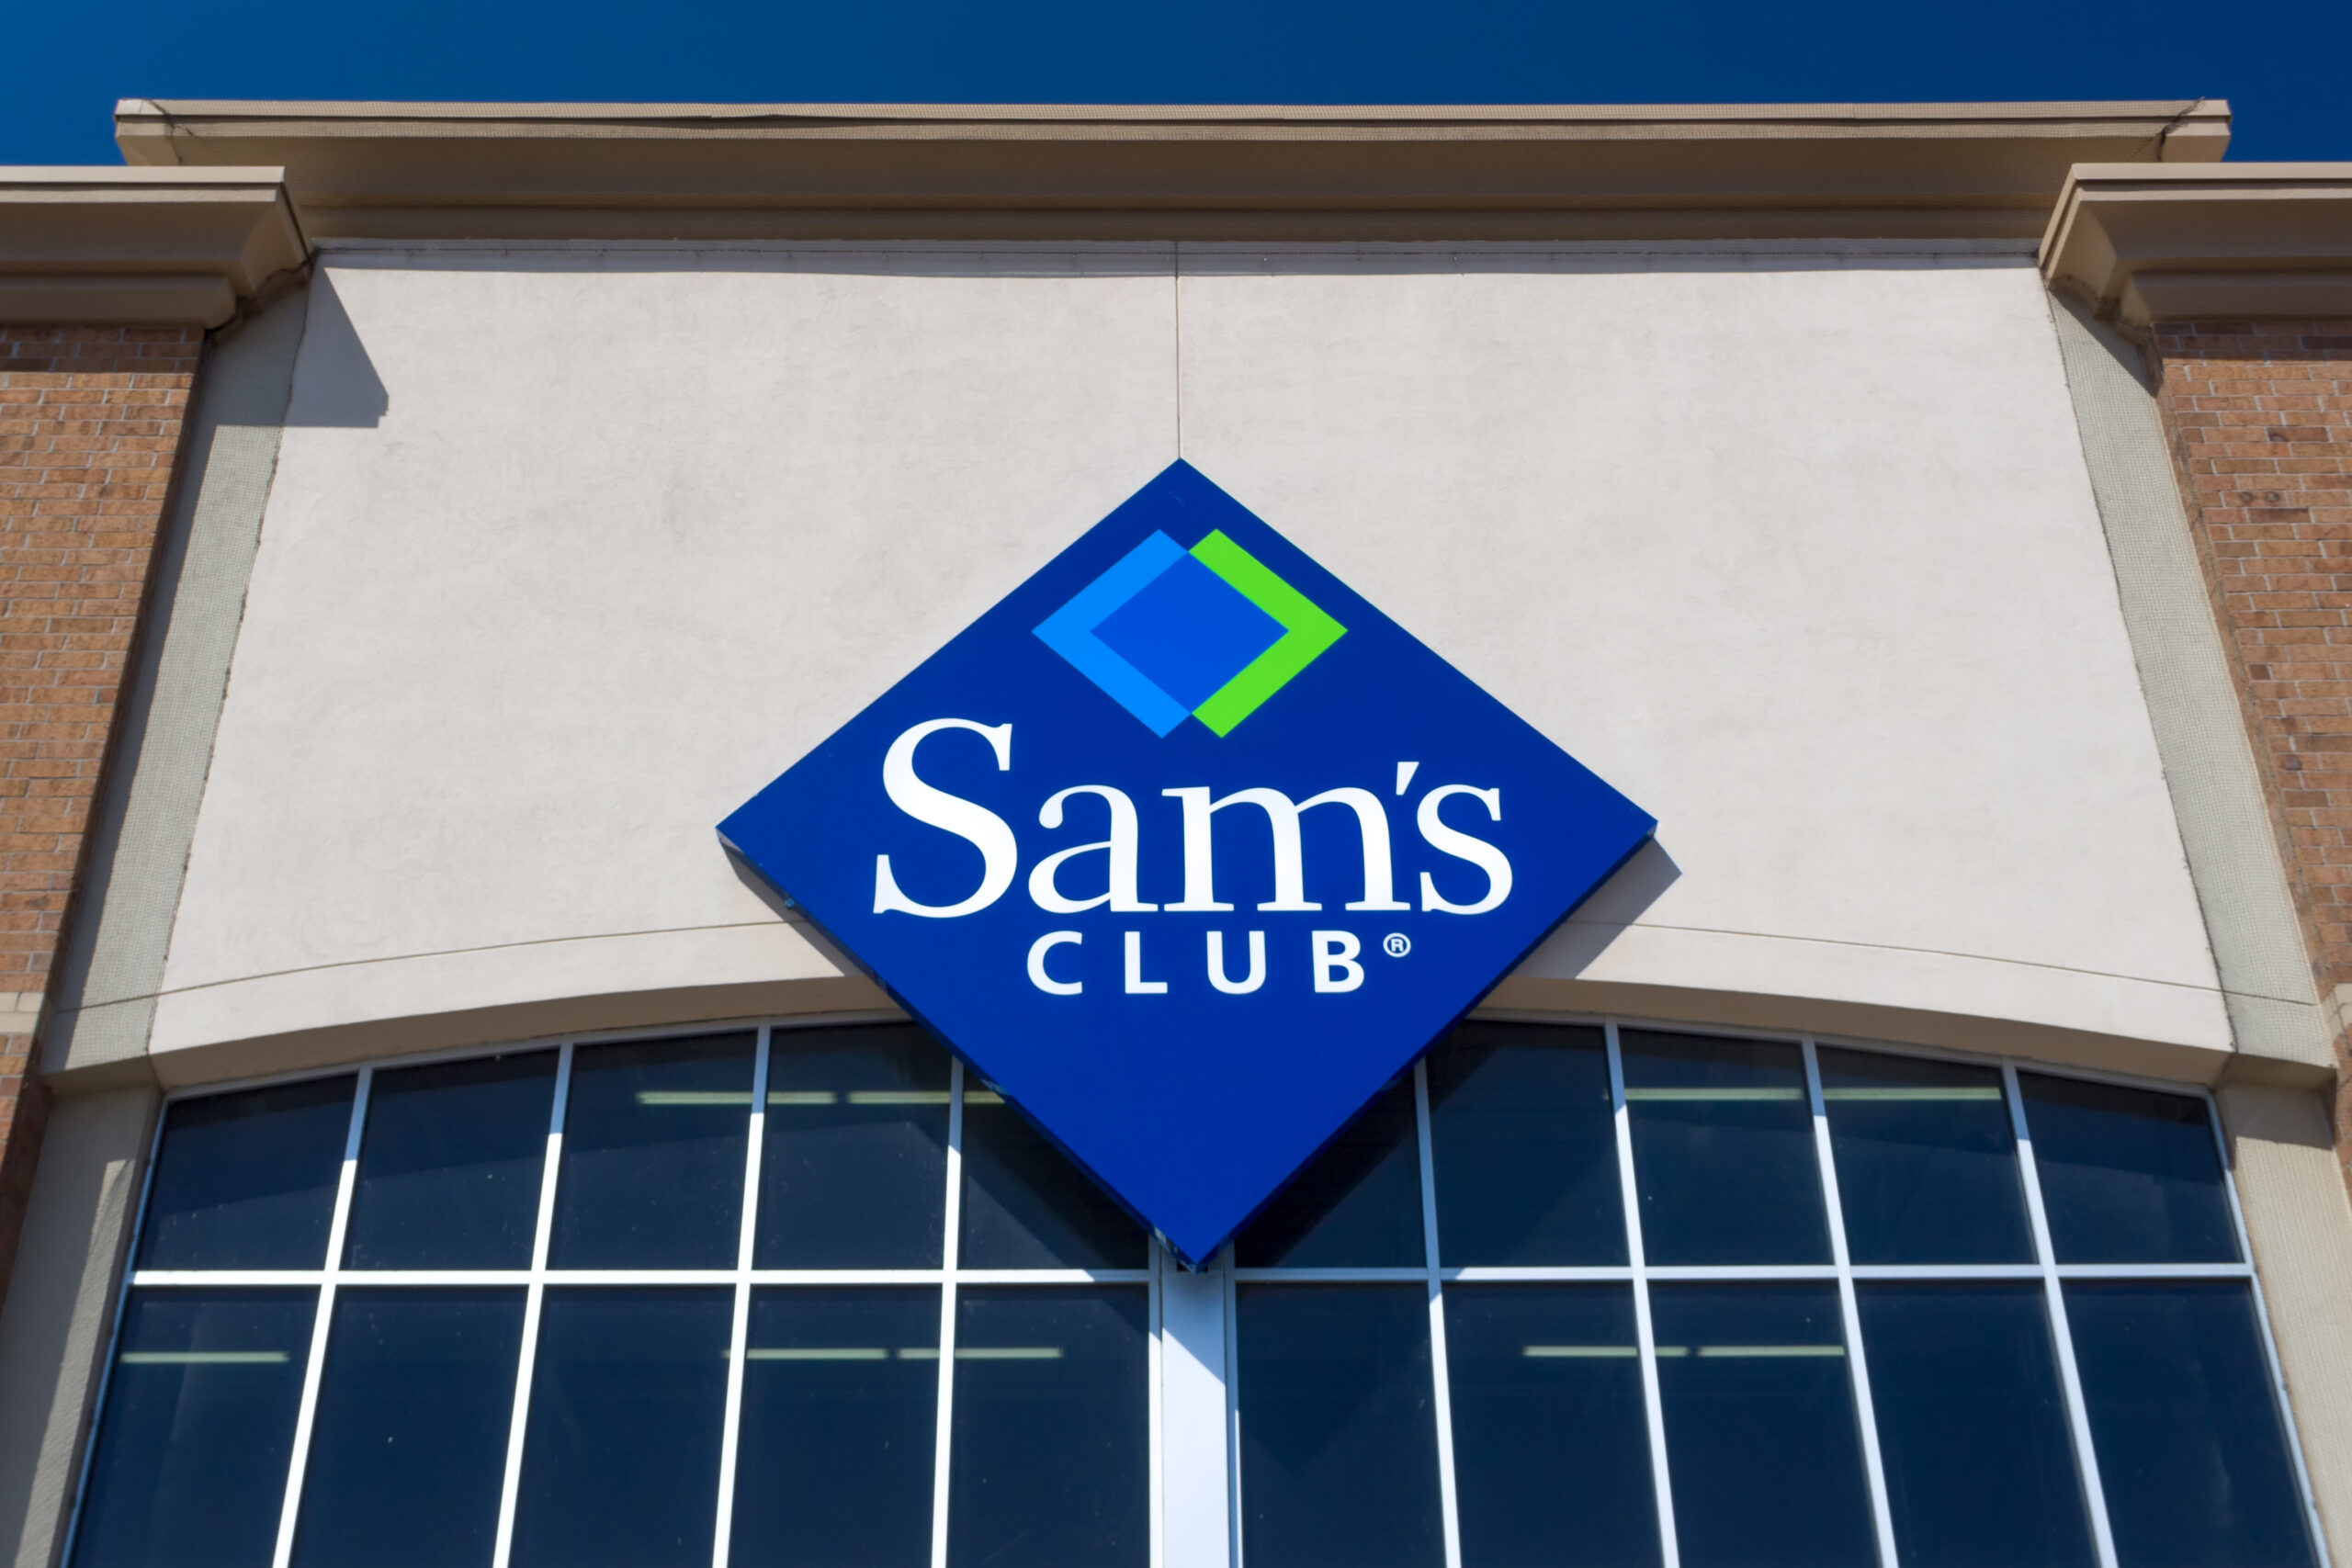 63-products-at-sam's-club-that-they-recommend-buying-in-may